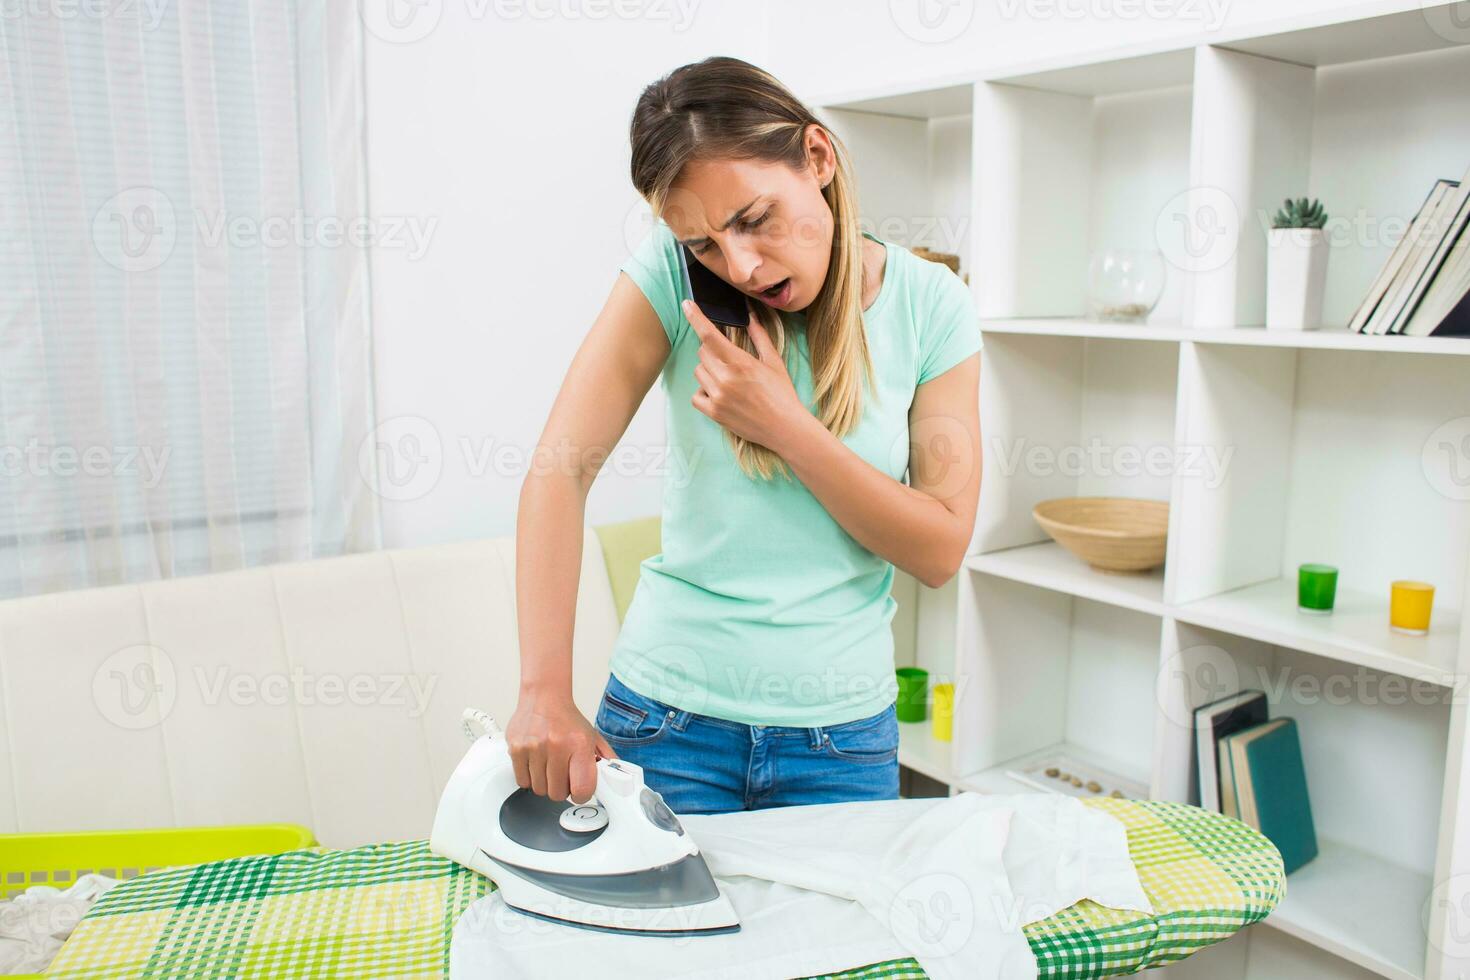 Busy and worried woman talking on the phone and ironing at the same time photo